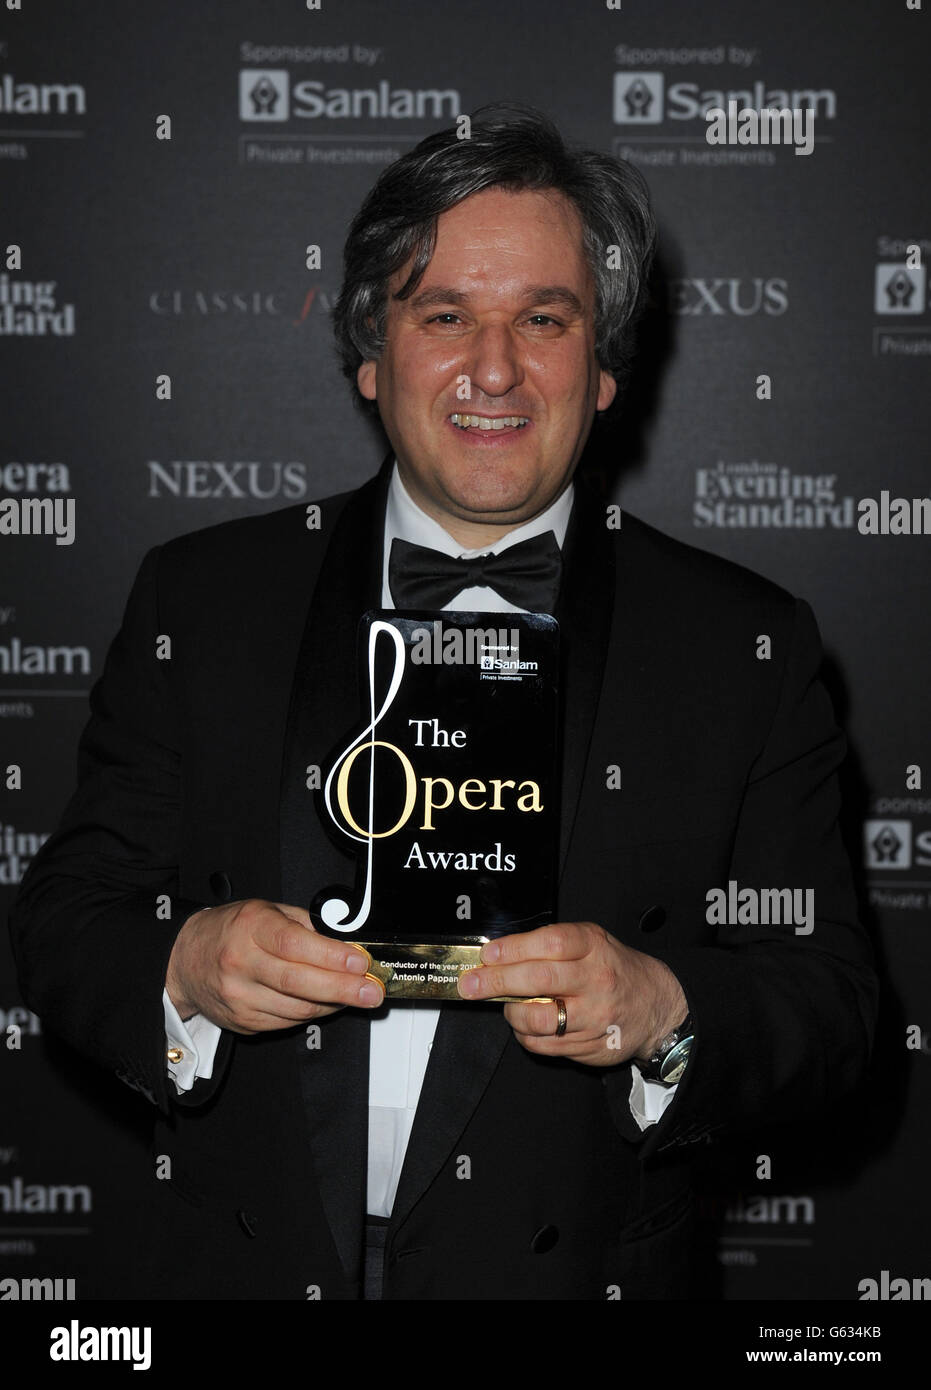 Antonio Pappano poses after winning the Conductor Award during the International Opera Awards at the Hilton Hotel, London. Stock Photo